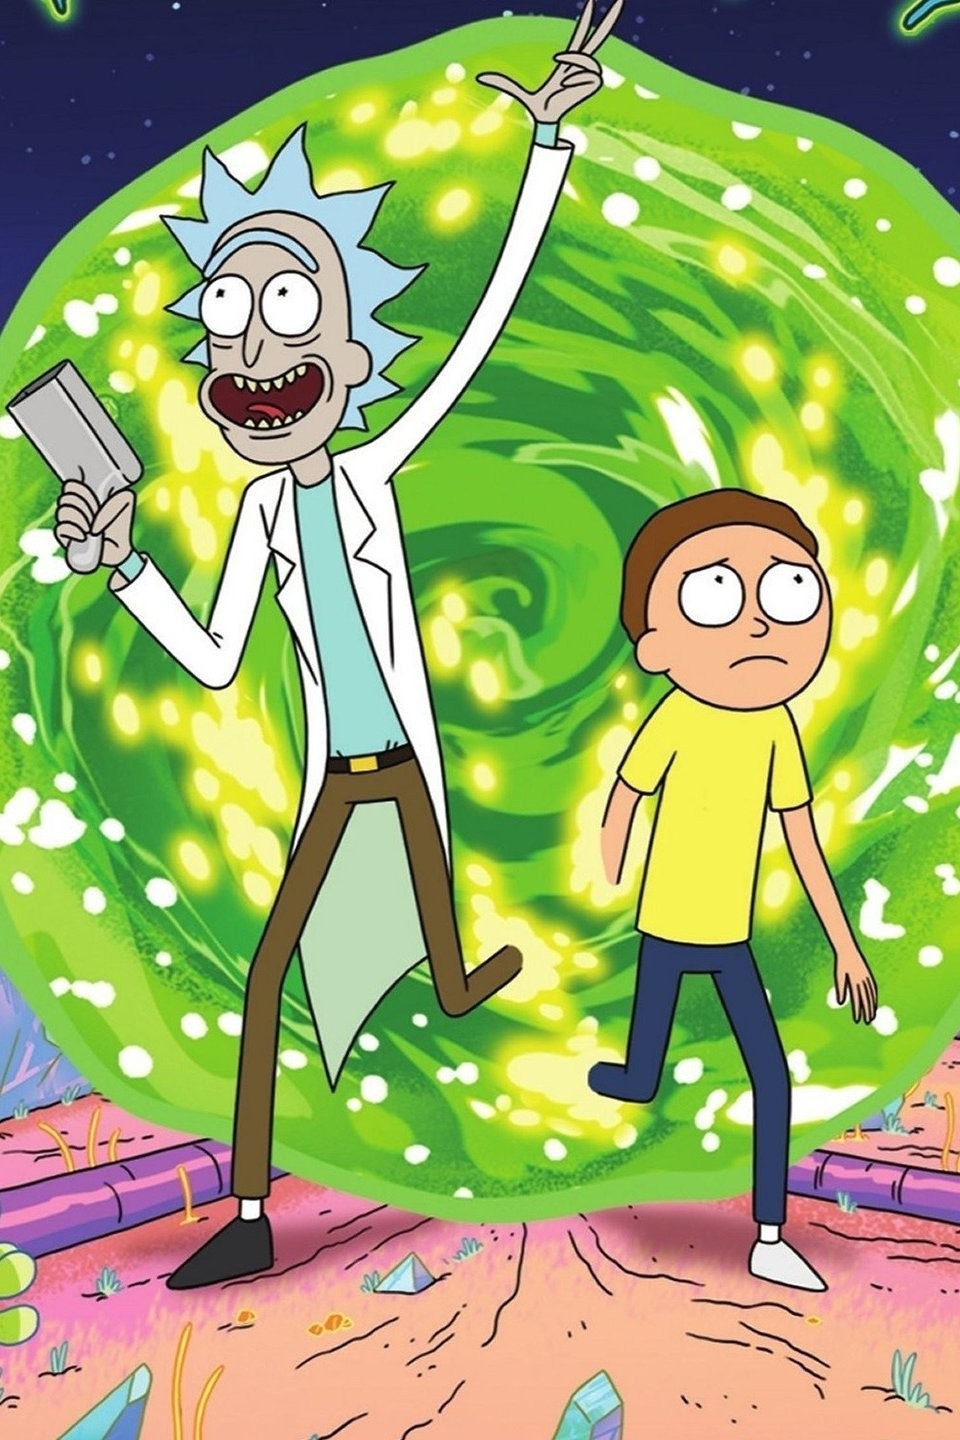 Rick and Morty: Season 1, Episode 7 - Rotten Tomatoes